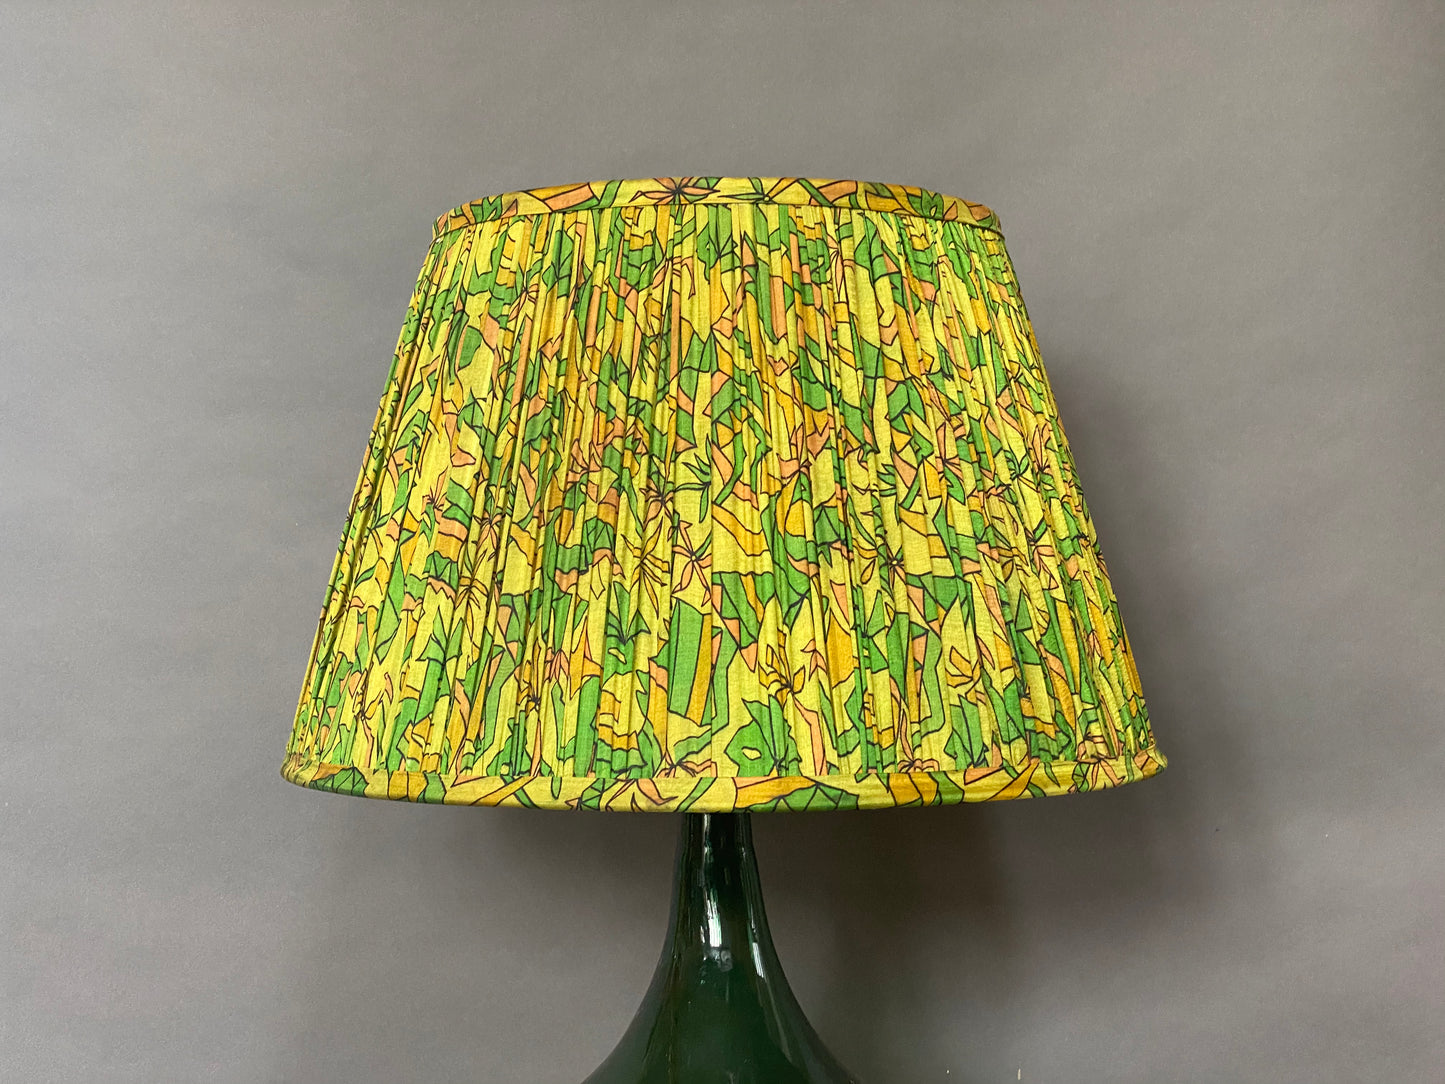 Green & citrine silk lampshade shown on a bottle green glass lamp base and a grey background